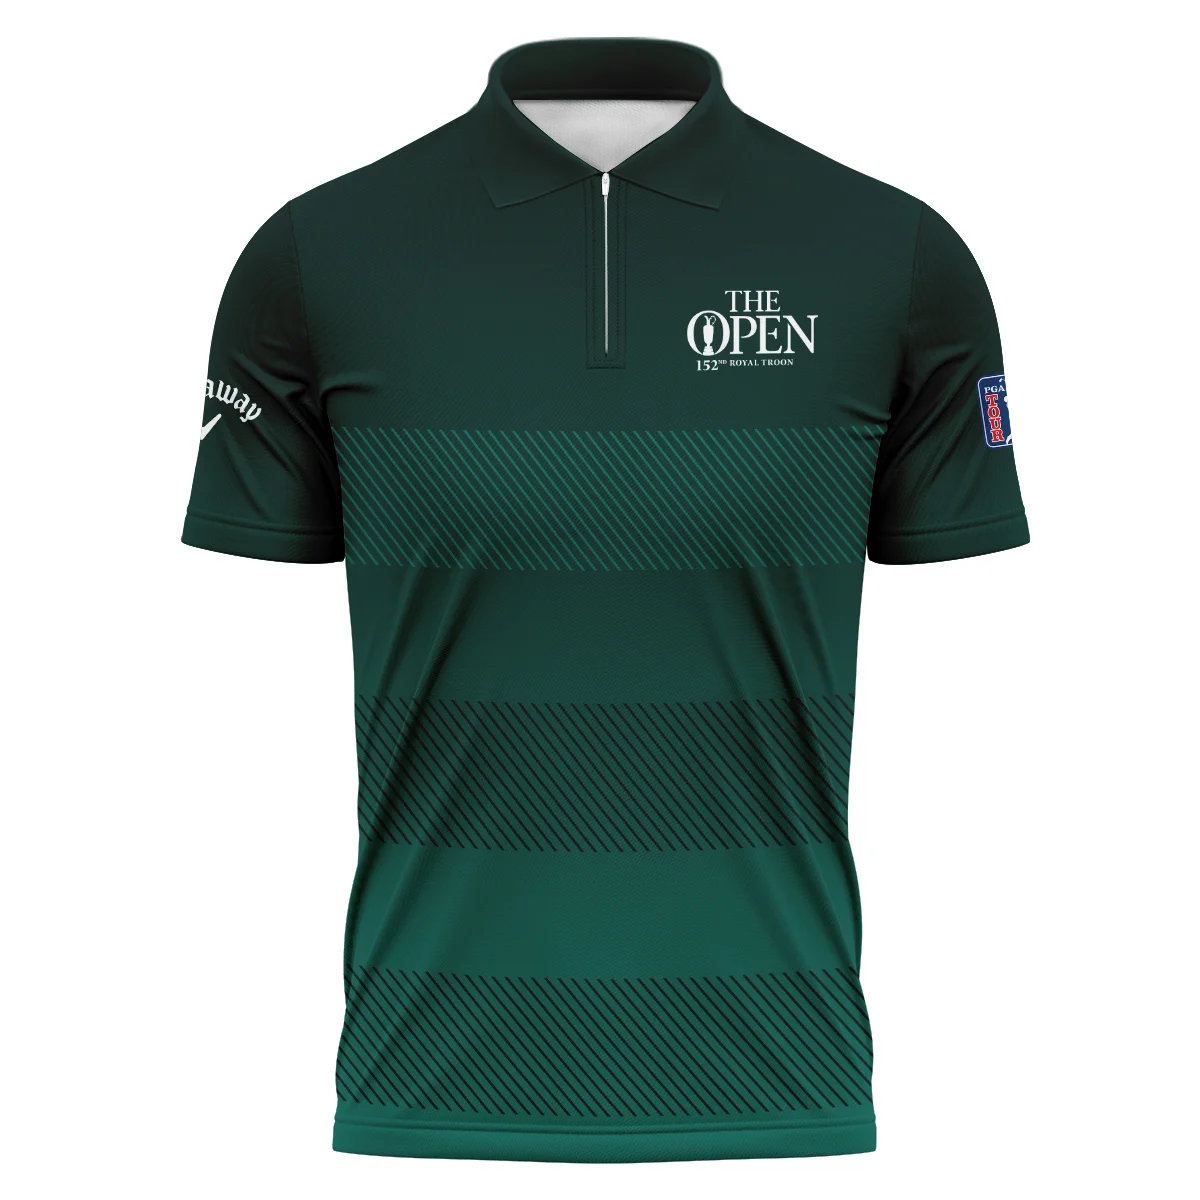 152nd Open Championship Callaway Dark Green Gradient Line Pattern Performance Quarter Zip Sweatshirt With Pockets All Over Prints HOTOP280624A01CLWTS